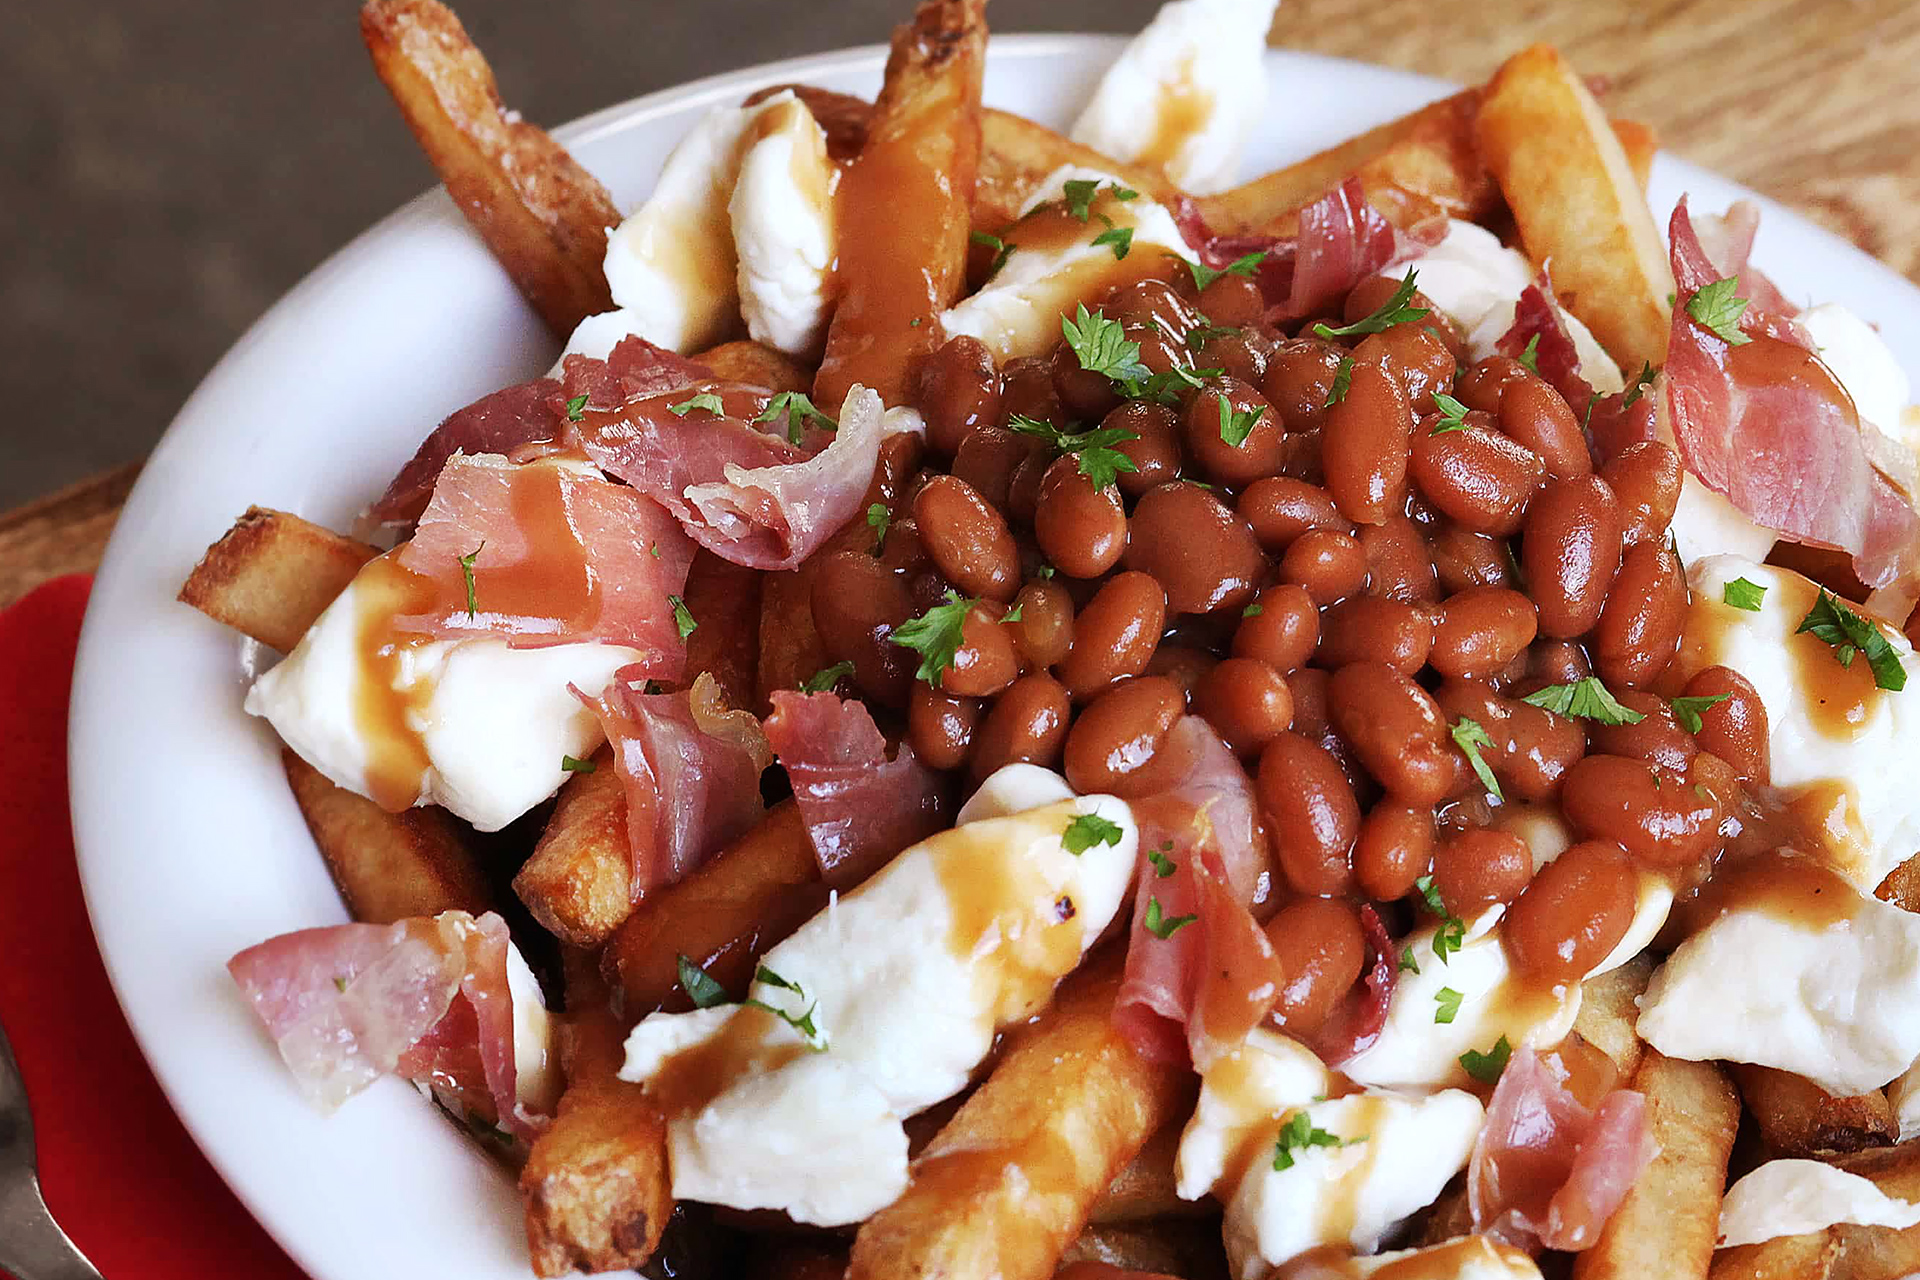 Poutine topped with Bush's Maple Baked Beans